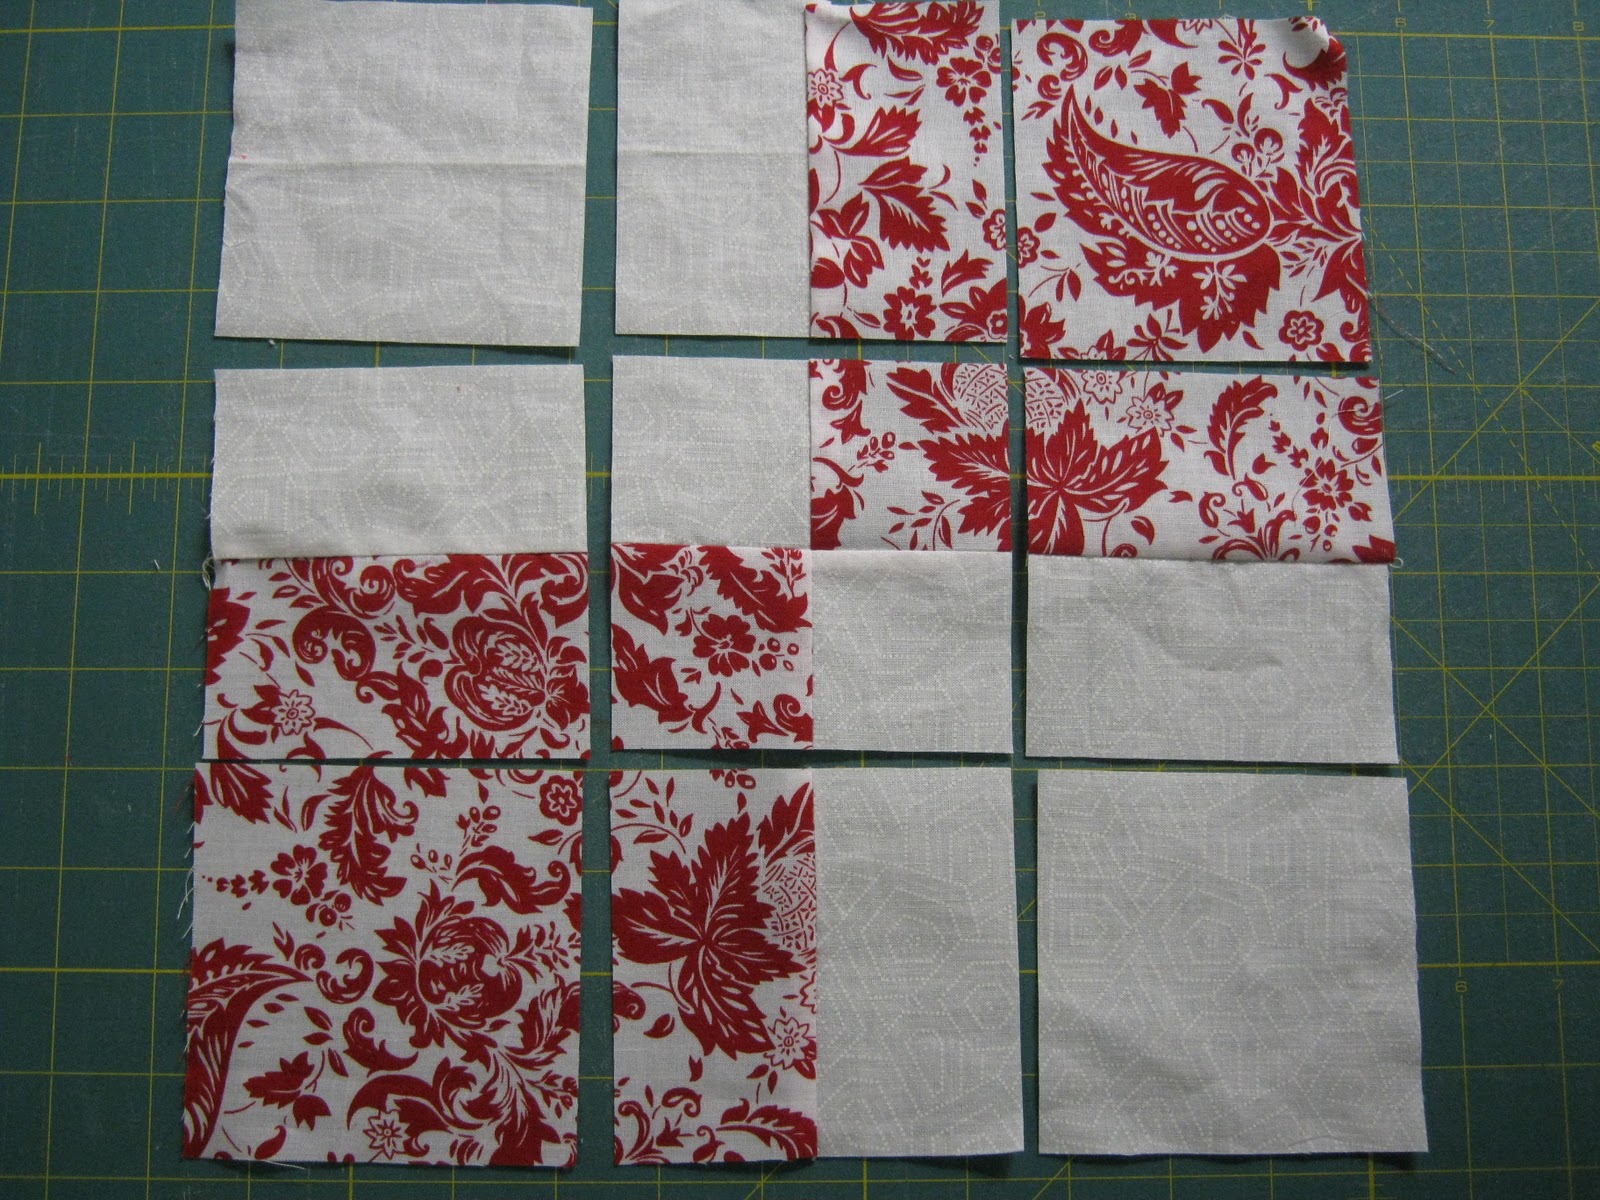 Free Quilt, Craft and Sewing Patterns: Links and Tutorials *With Heart